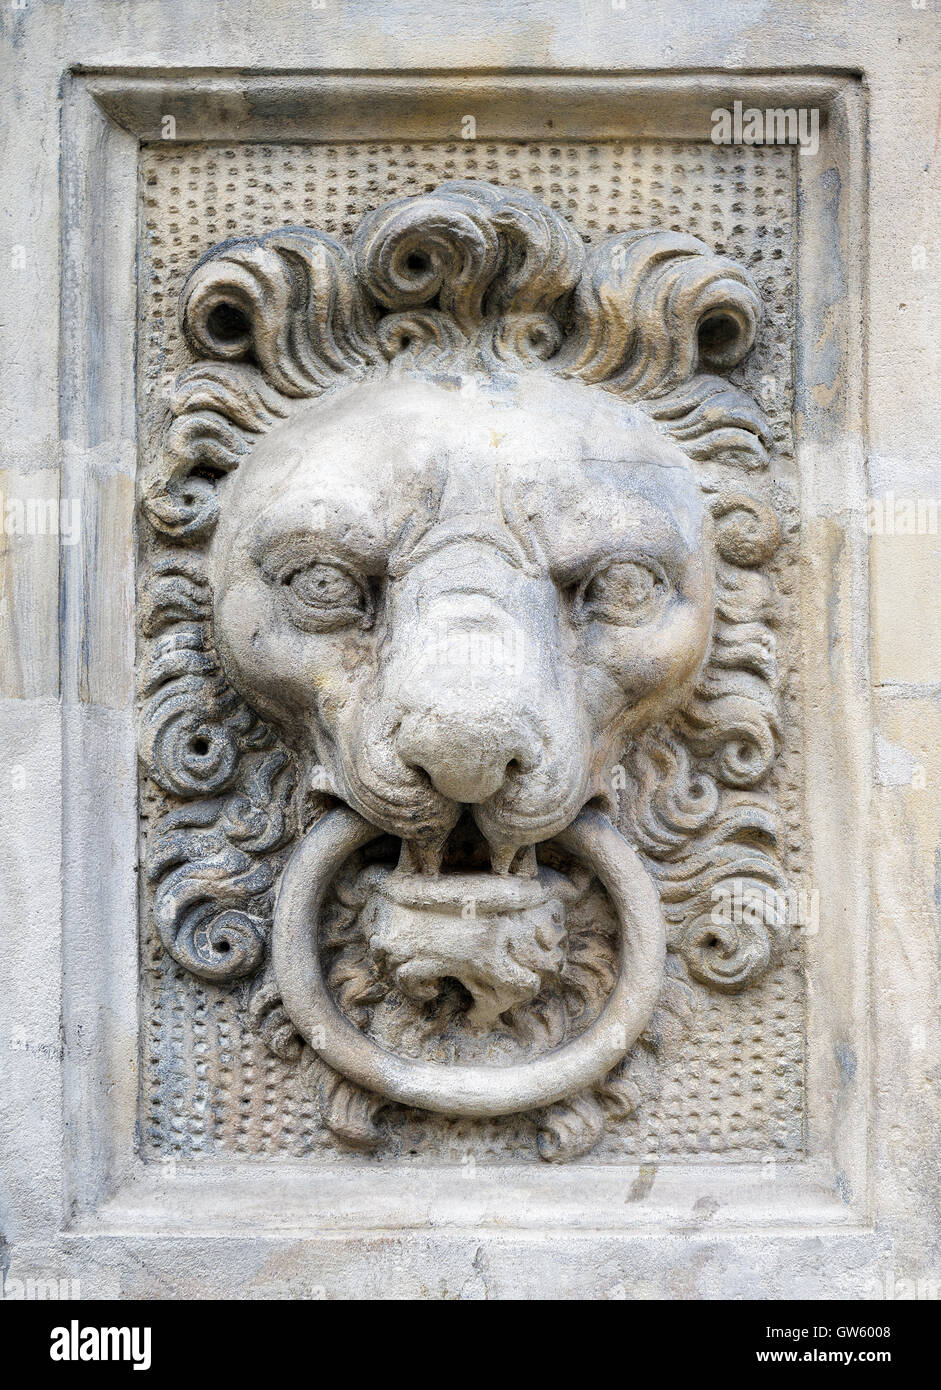 Stone lion head architectural decoration carved on a wall Stock Photo